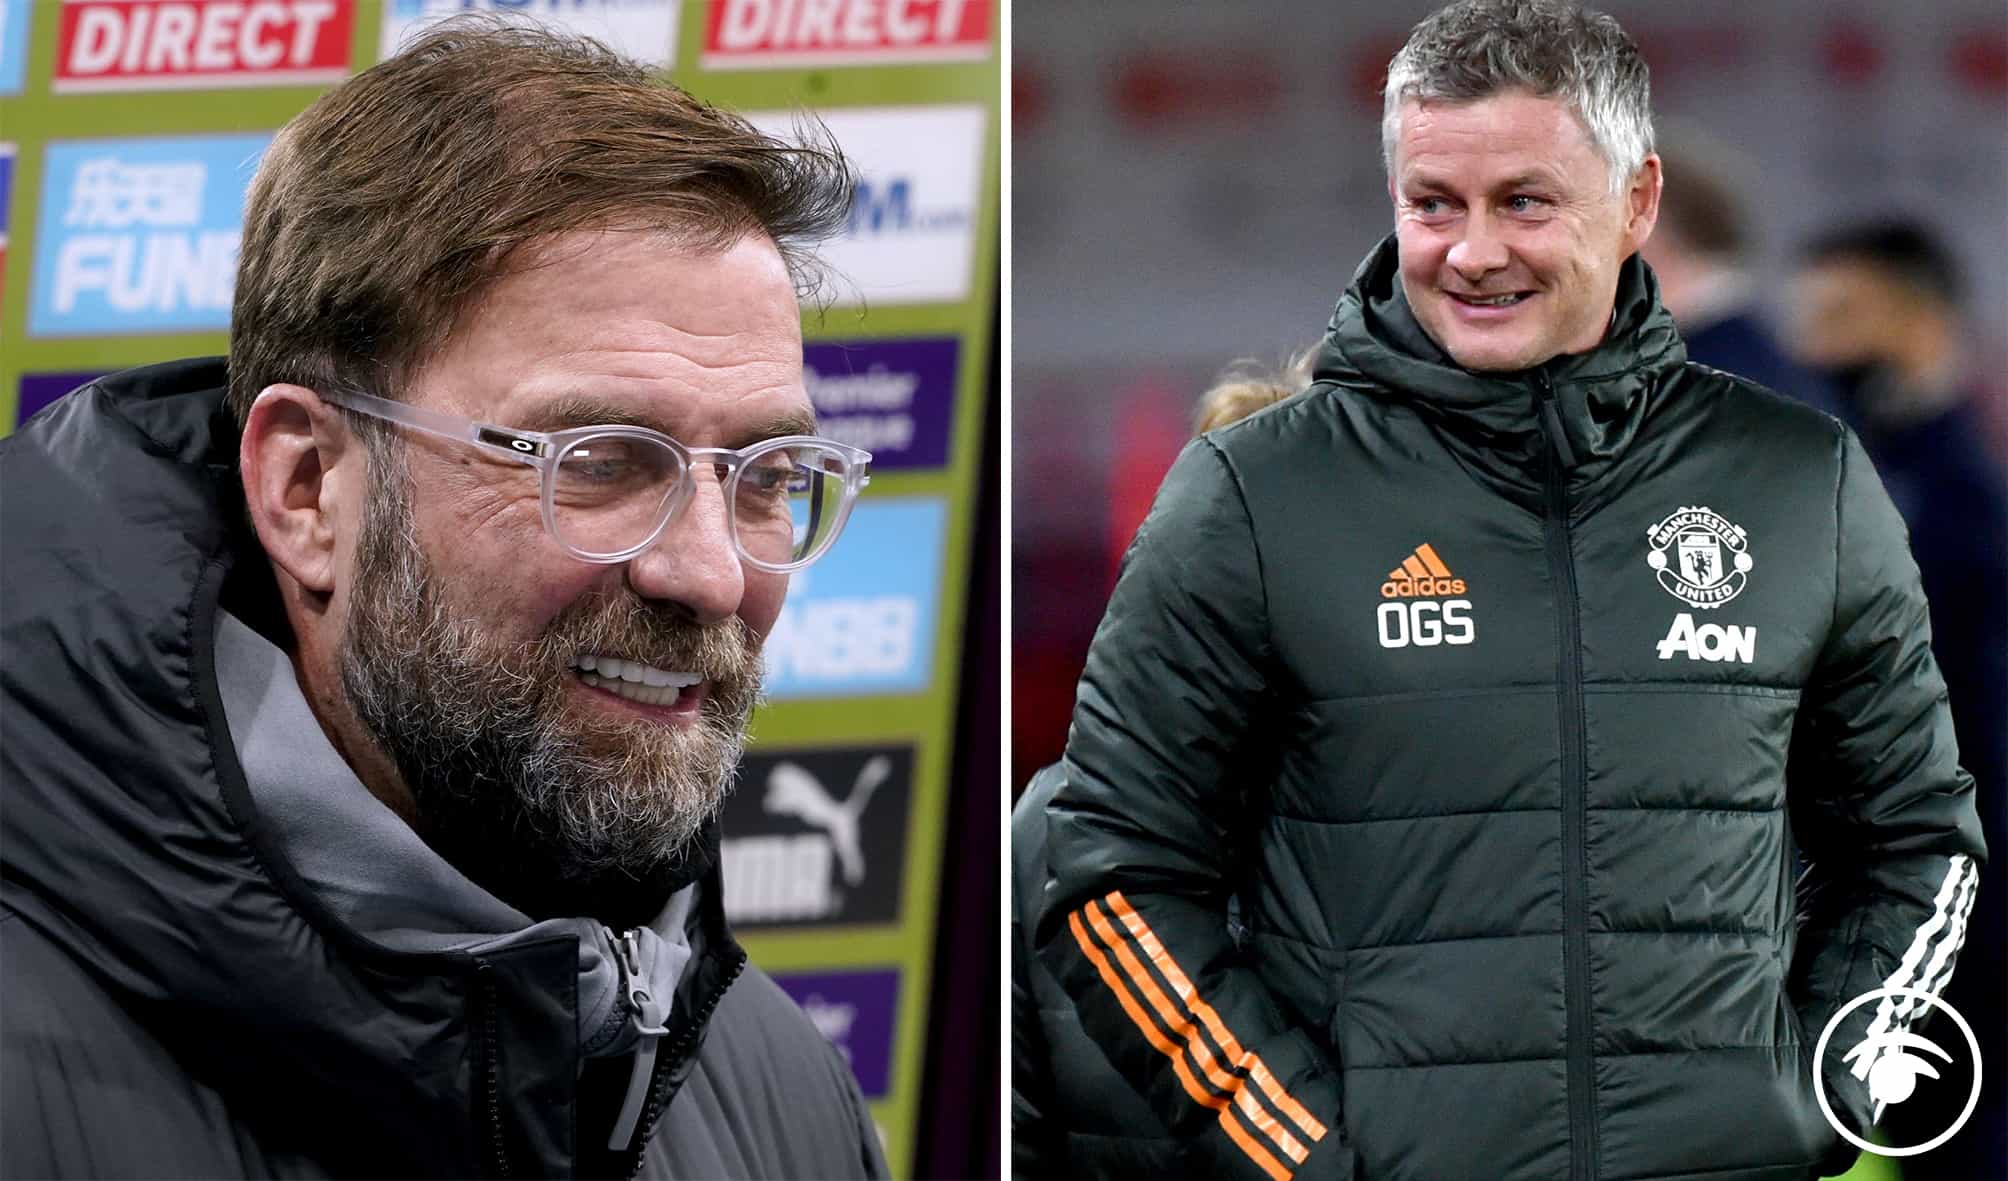 Liverpool vs Man Utd – A top of the table clash – who would have thought it!